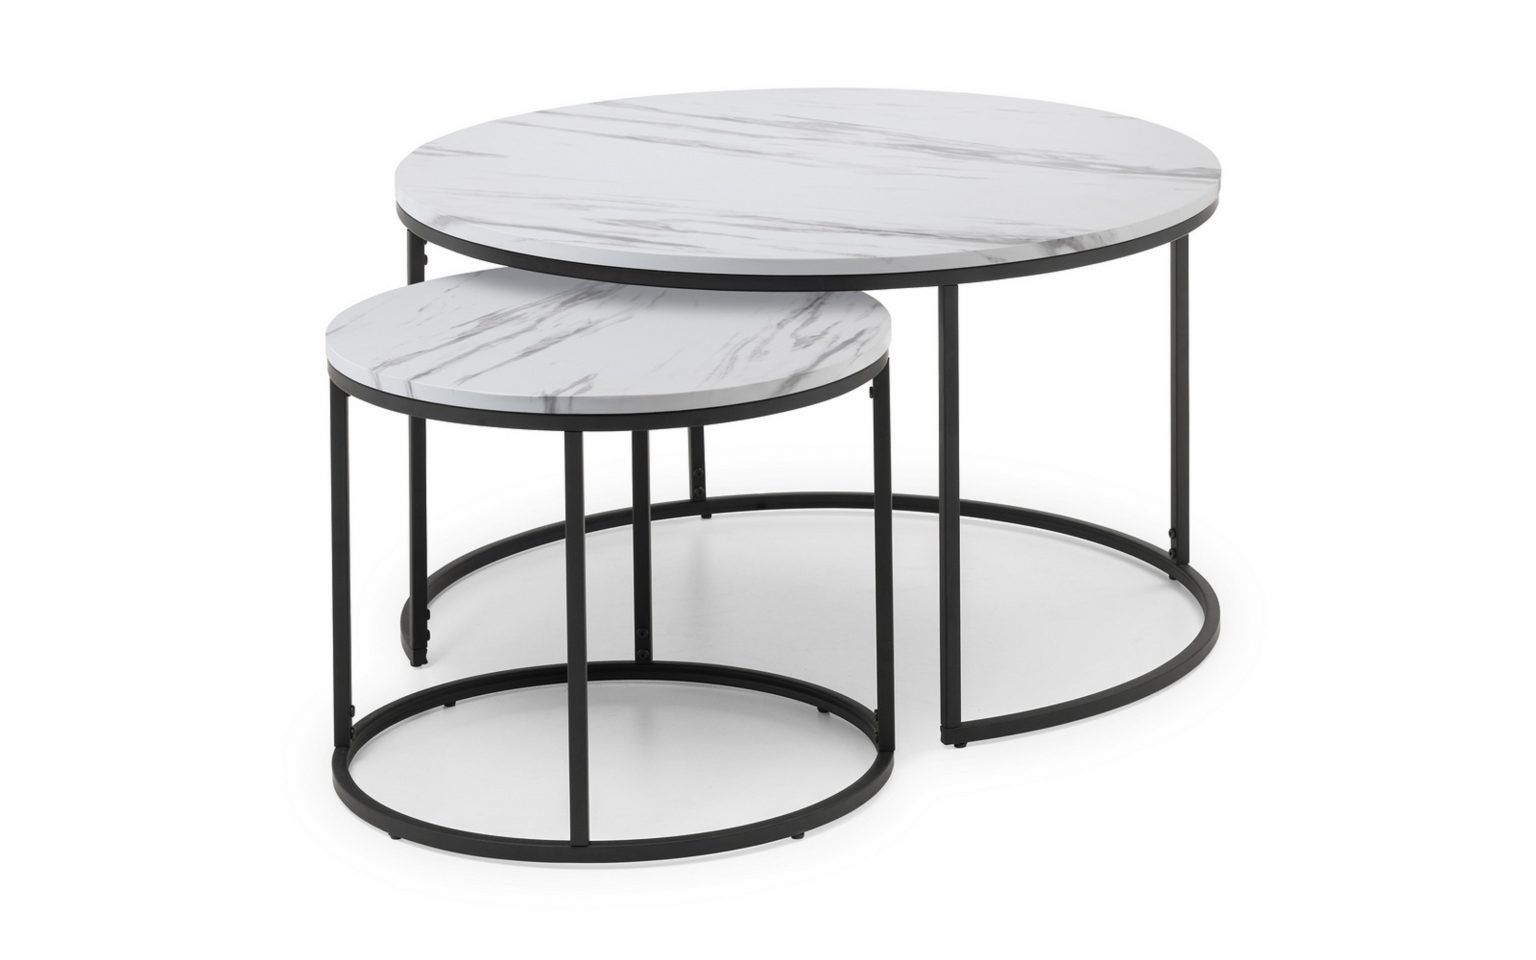 White Stone Coffee Tables With Regard To Favorite Bellini Round Nesting Coffee Table – White Marble (View 3 of 20)